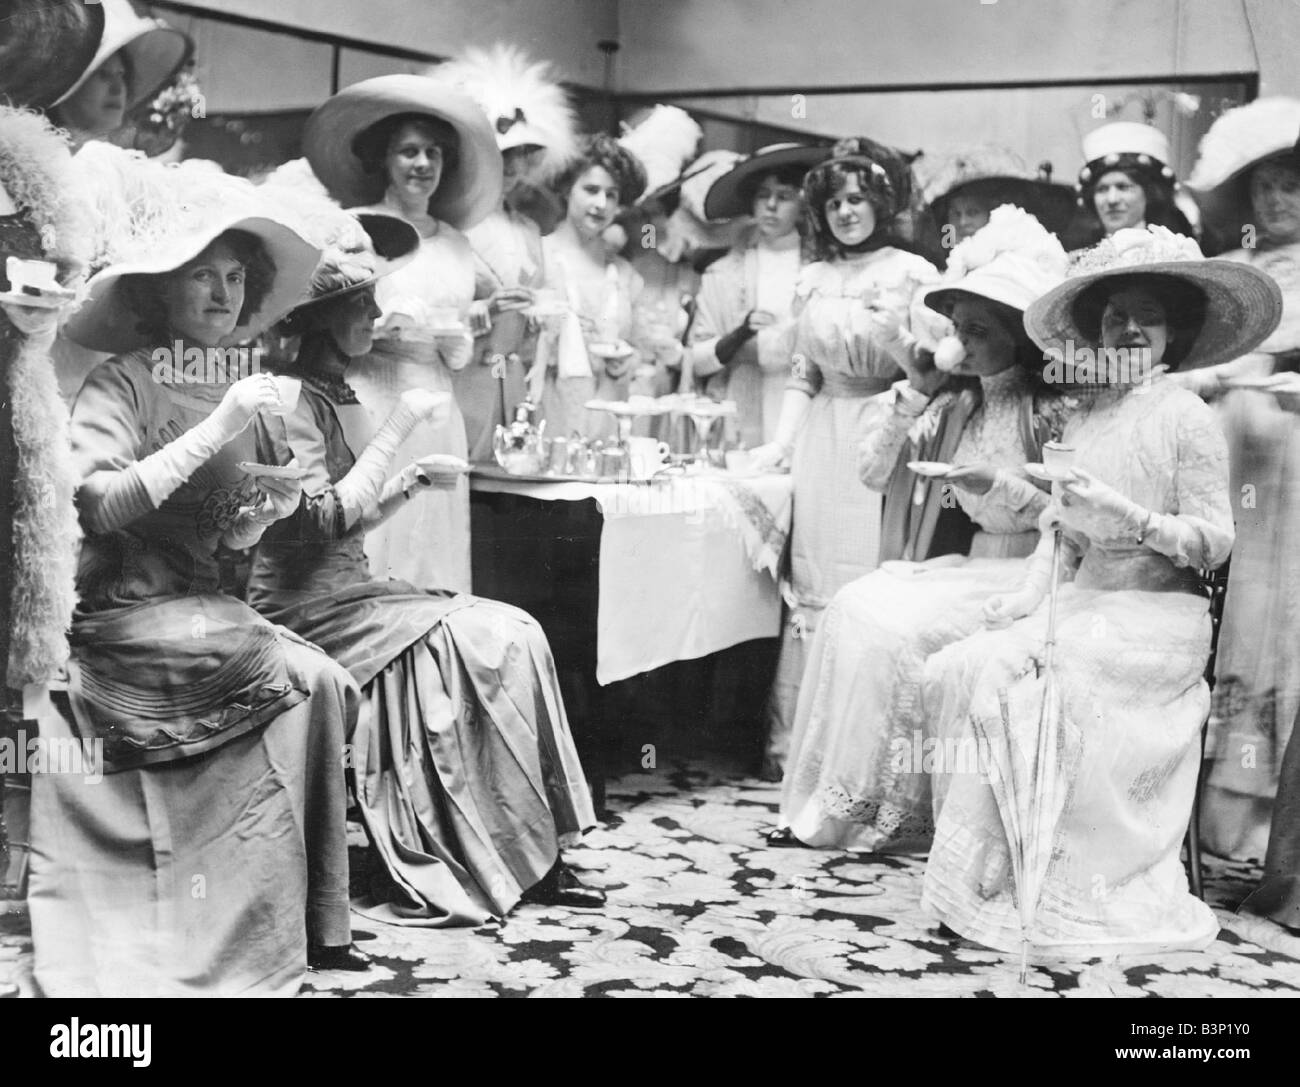 Clothing Fashion Edwardian fashions 1920s Mannequins having a cup of tea at Whitley s Wearing white lace dresses and wide brimmed hats trimmed with feathers August 1910 Stock Photo